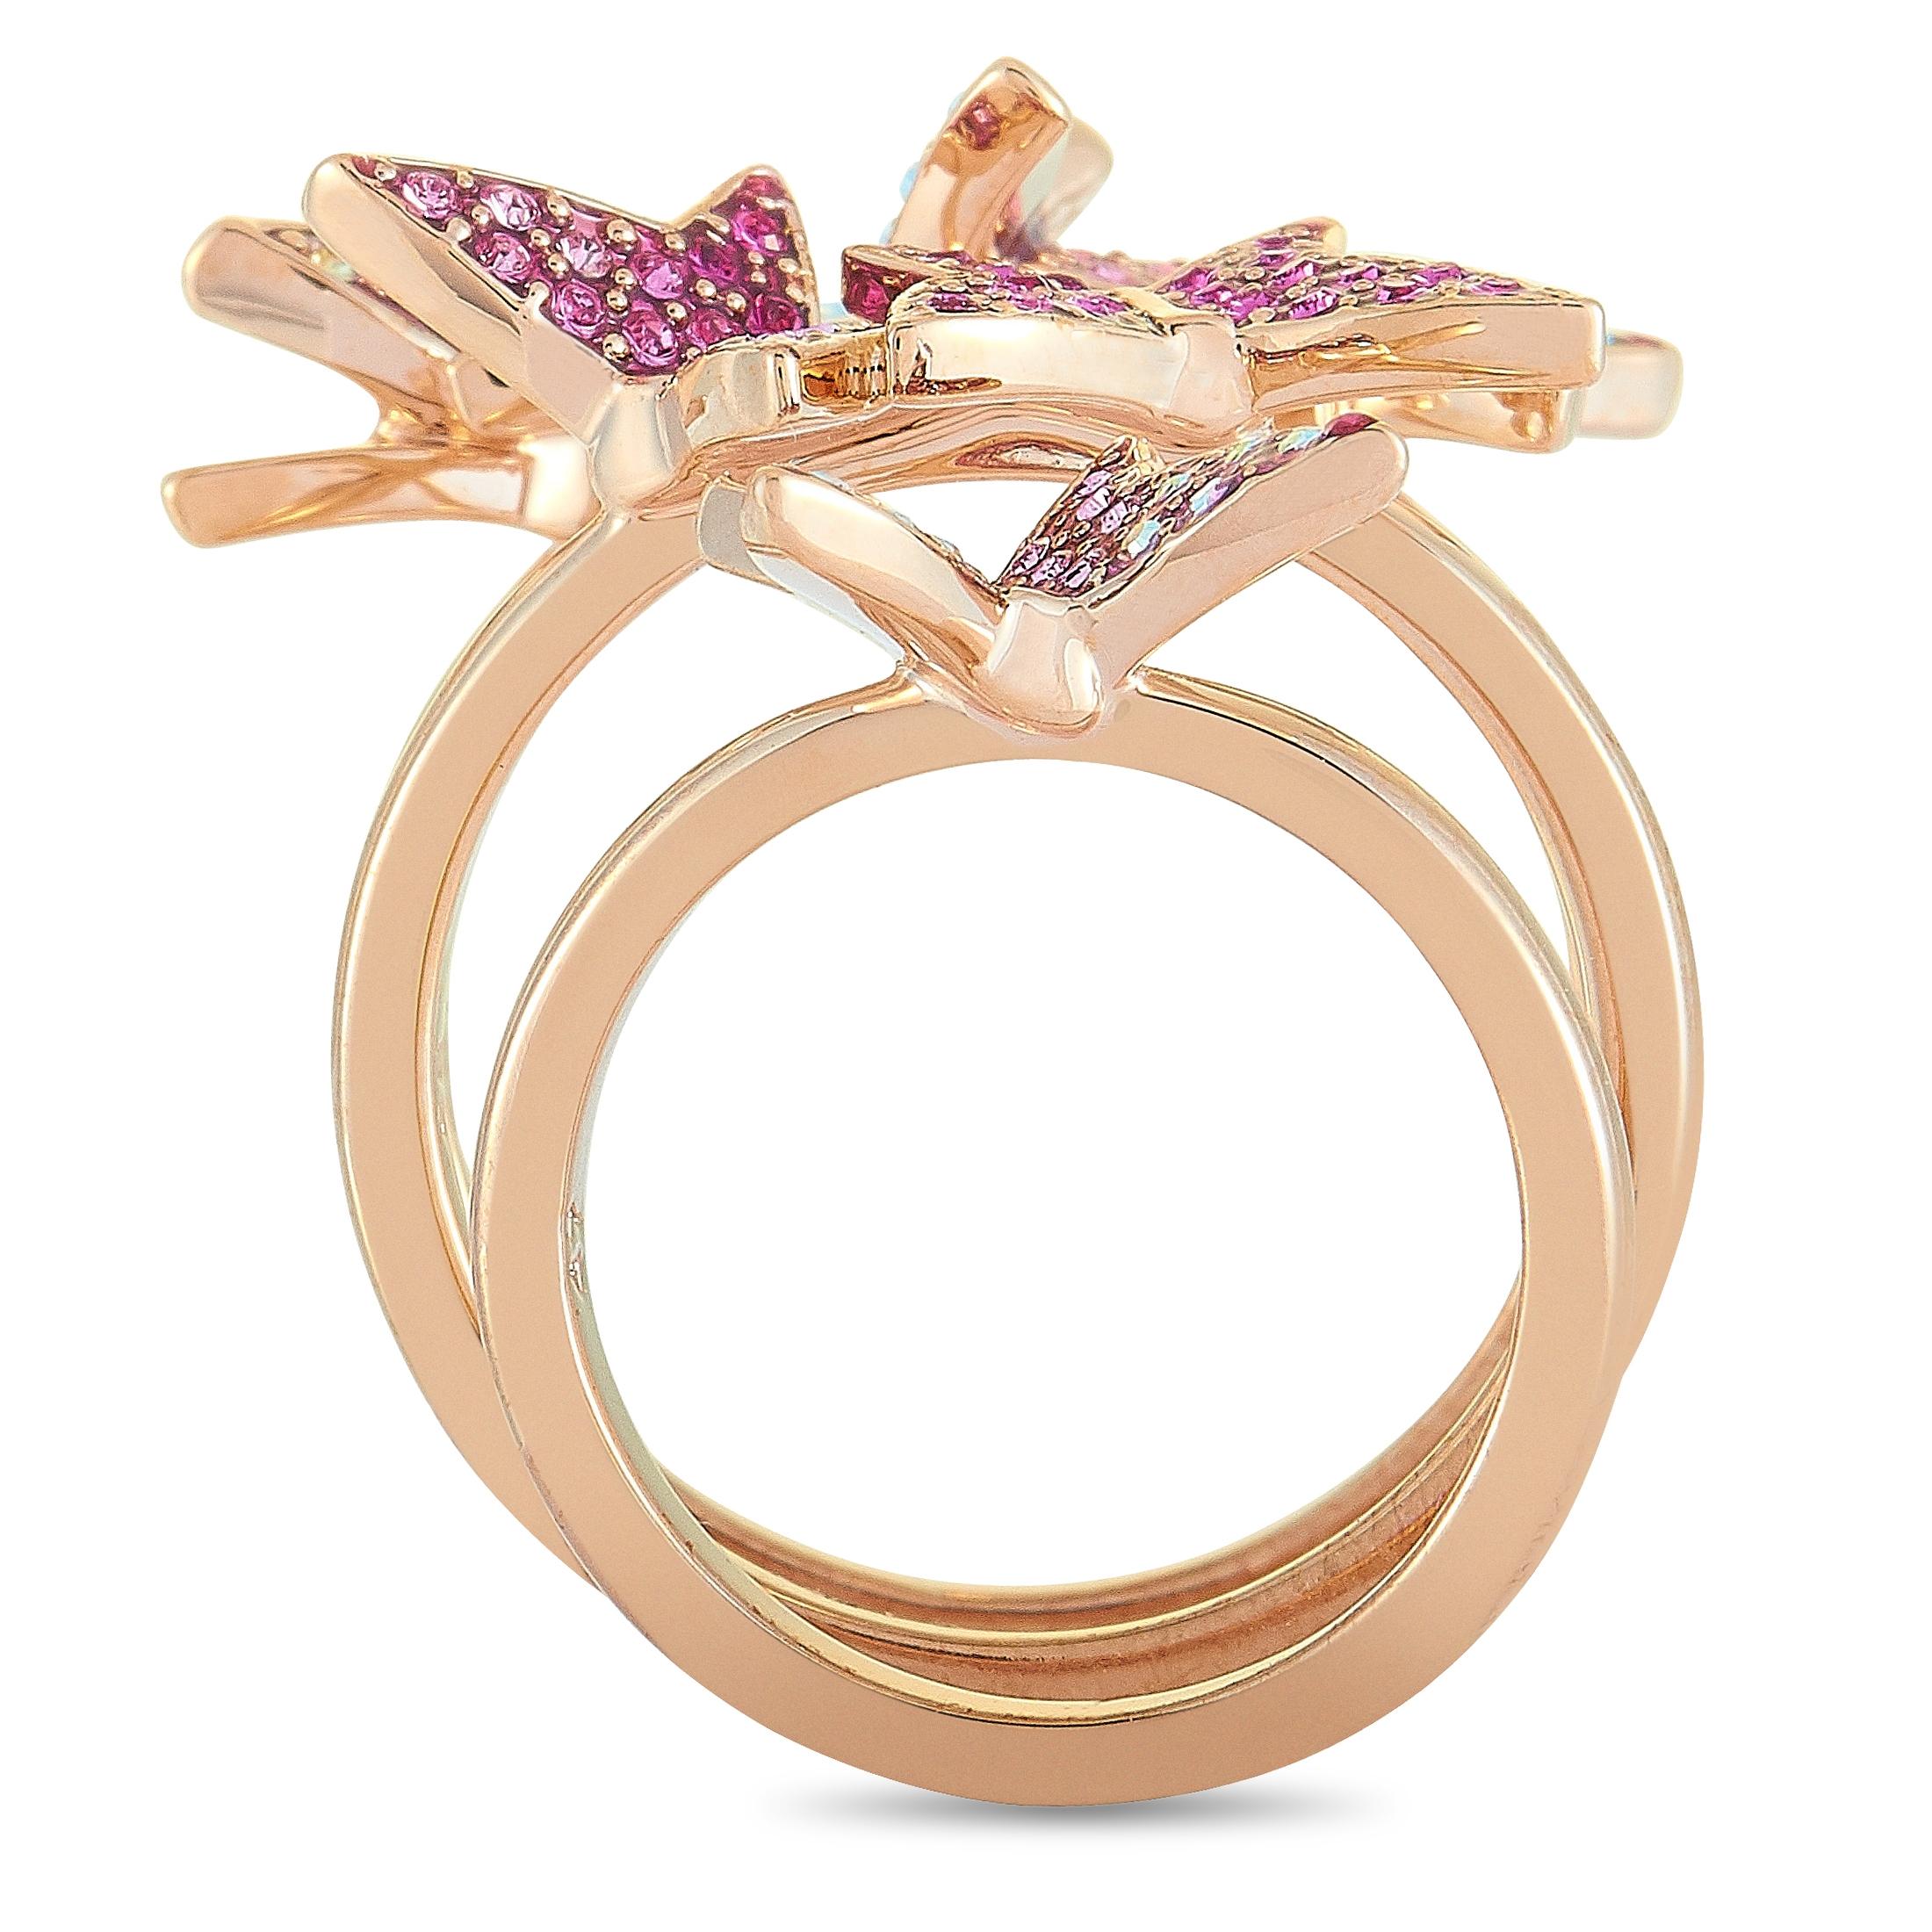 The Swarovski “Lilia” stackable rings are made of 18K rose gold-plated stainless steel and embellished with pink and clear Swarovski crystals. The rings weigh 8.4 grams in total, boasting combined band thickness of 4 mm and top height of 6 mm, while